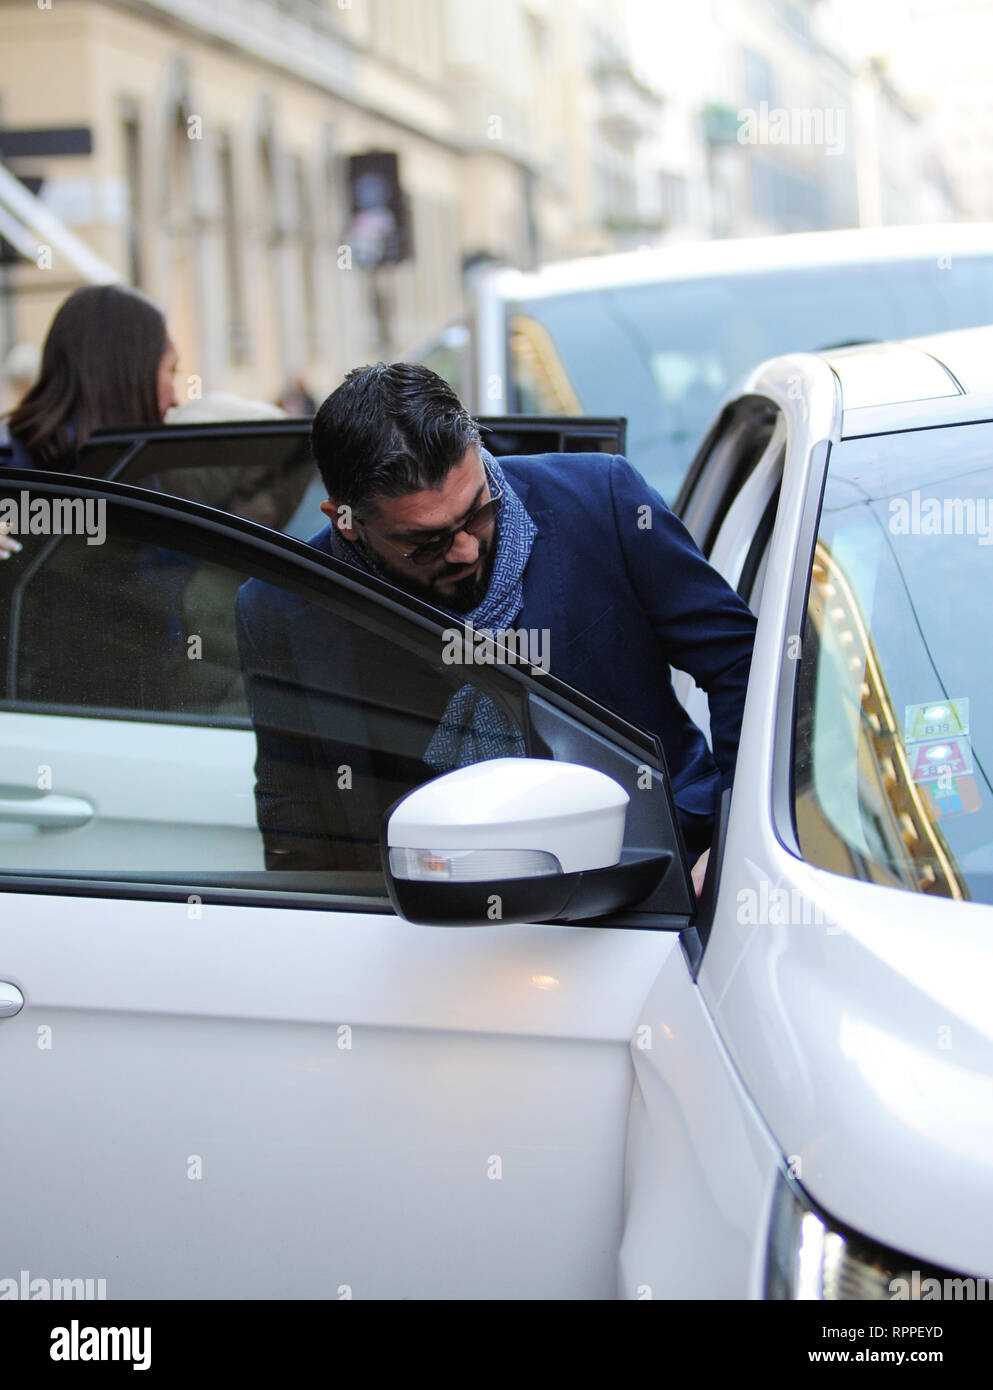 Rino Gattuso out and about with his family after having a meal at the Salumaio di Montenapoleone in Milan  Featuring: Rino Gattuso Where: Milan, Italy When: 22 Jan 2019 Credit: IPA/WENN.com  **Only available for publication in UK, USA, Germany, Austria, Switzerland** Stock Photo